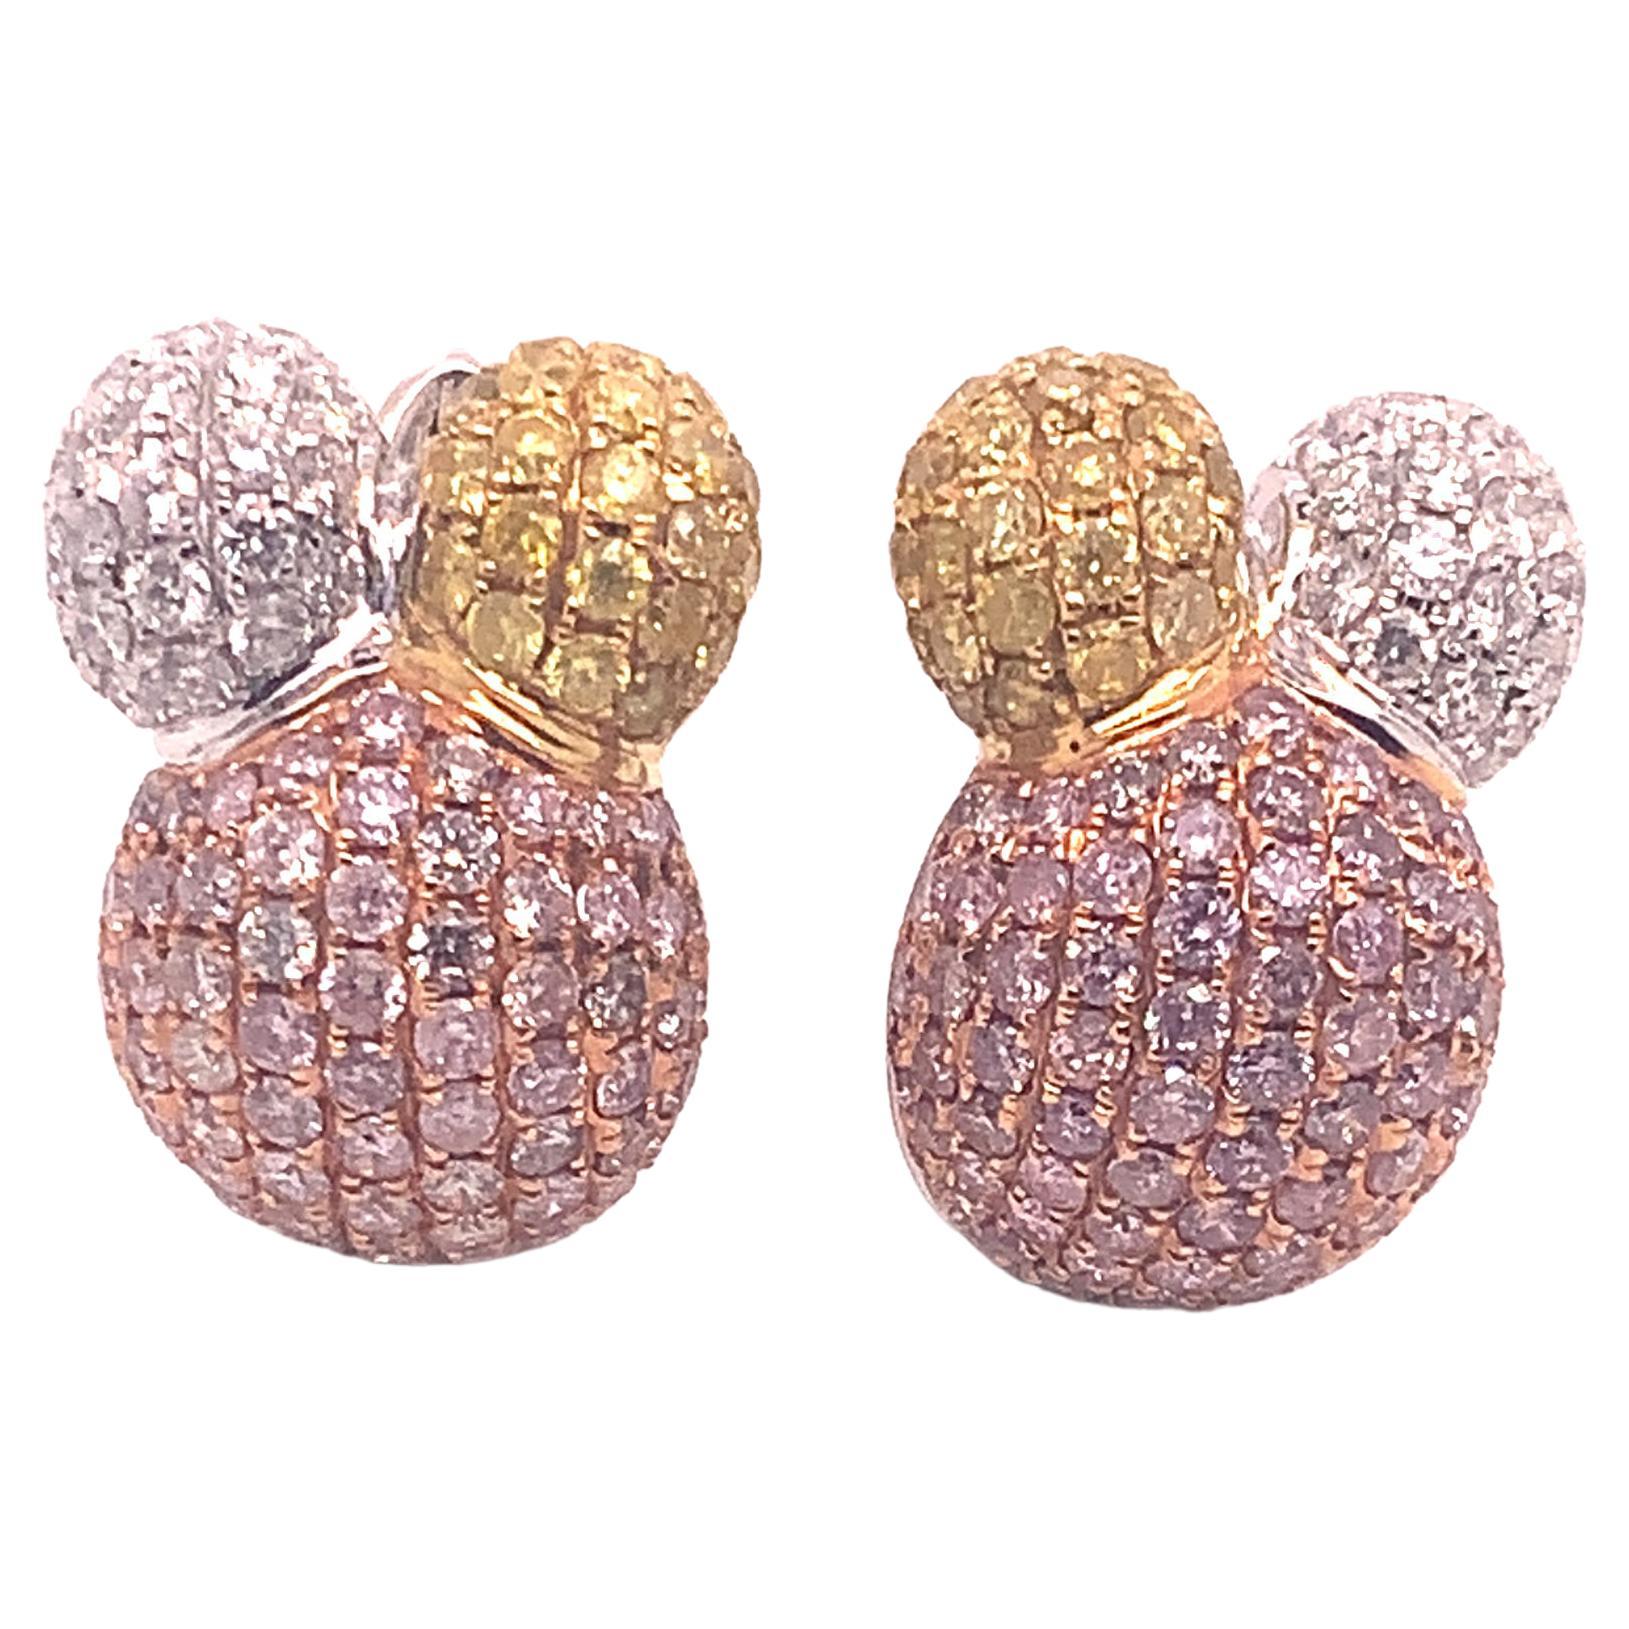 5.90 Carat Natural Fancy Pink & Yellow Diamond Earring in 18k Tricolor Gold